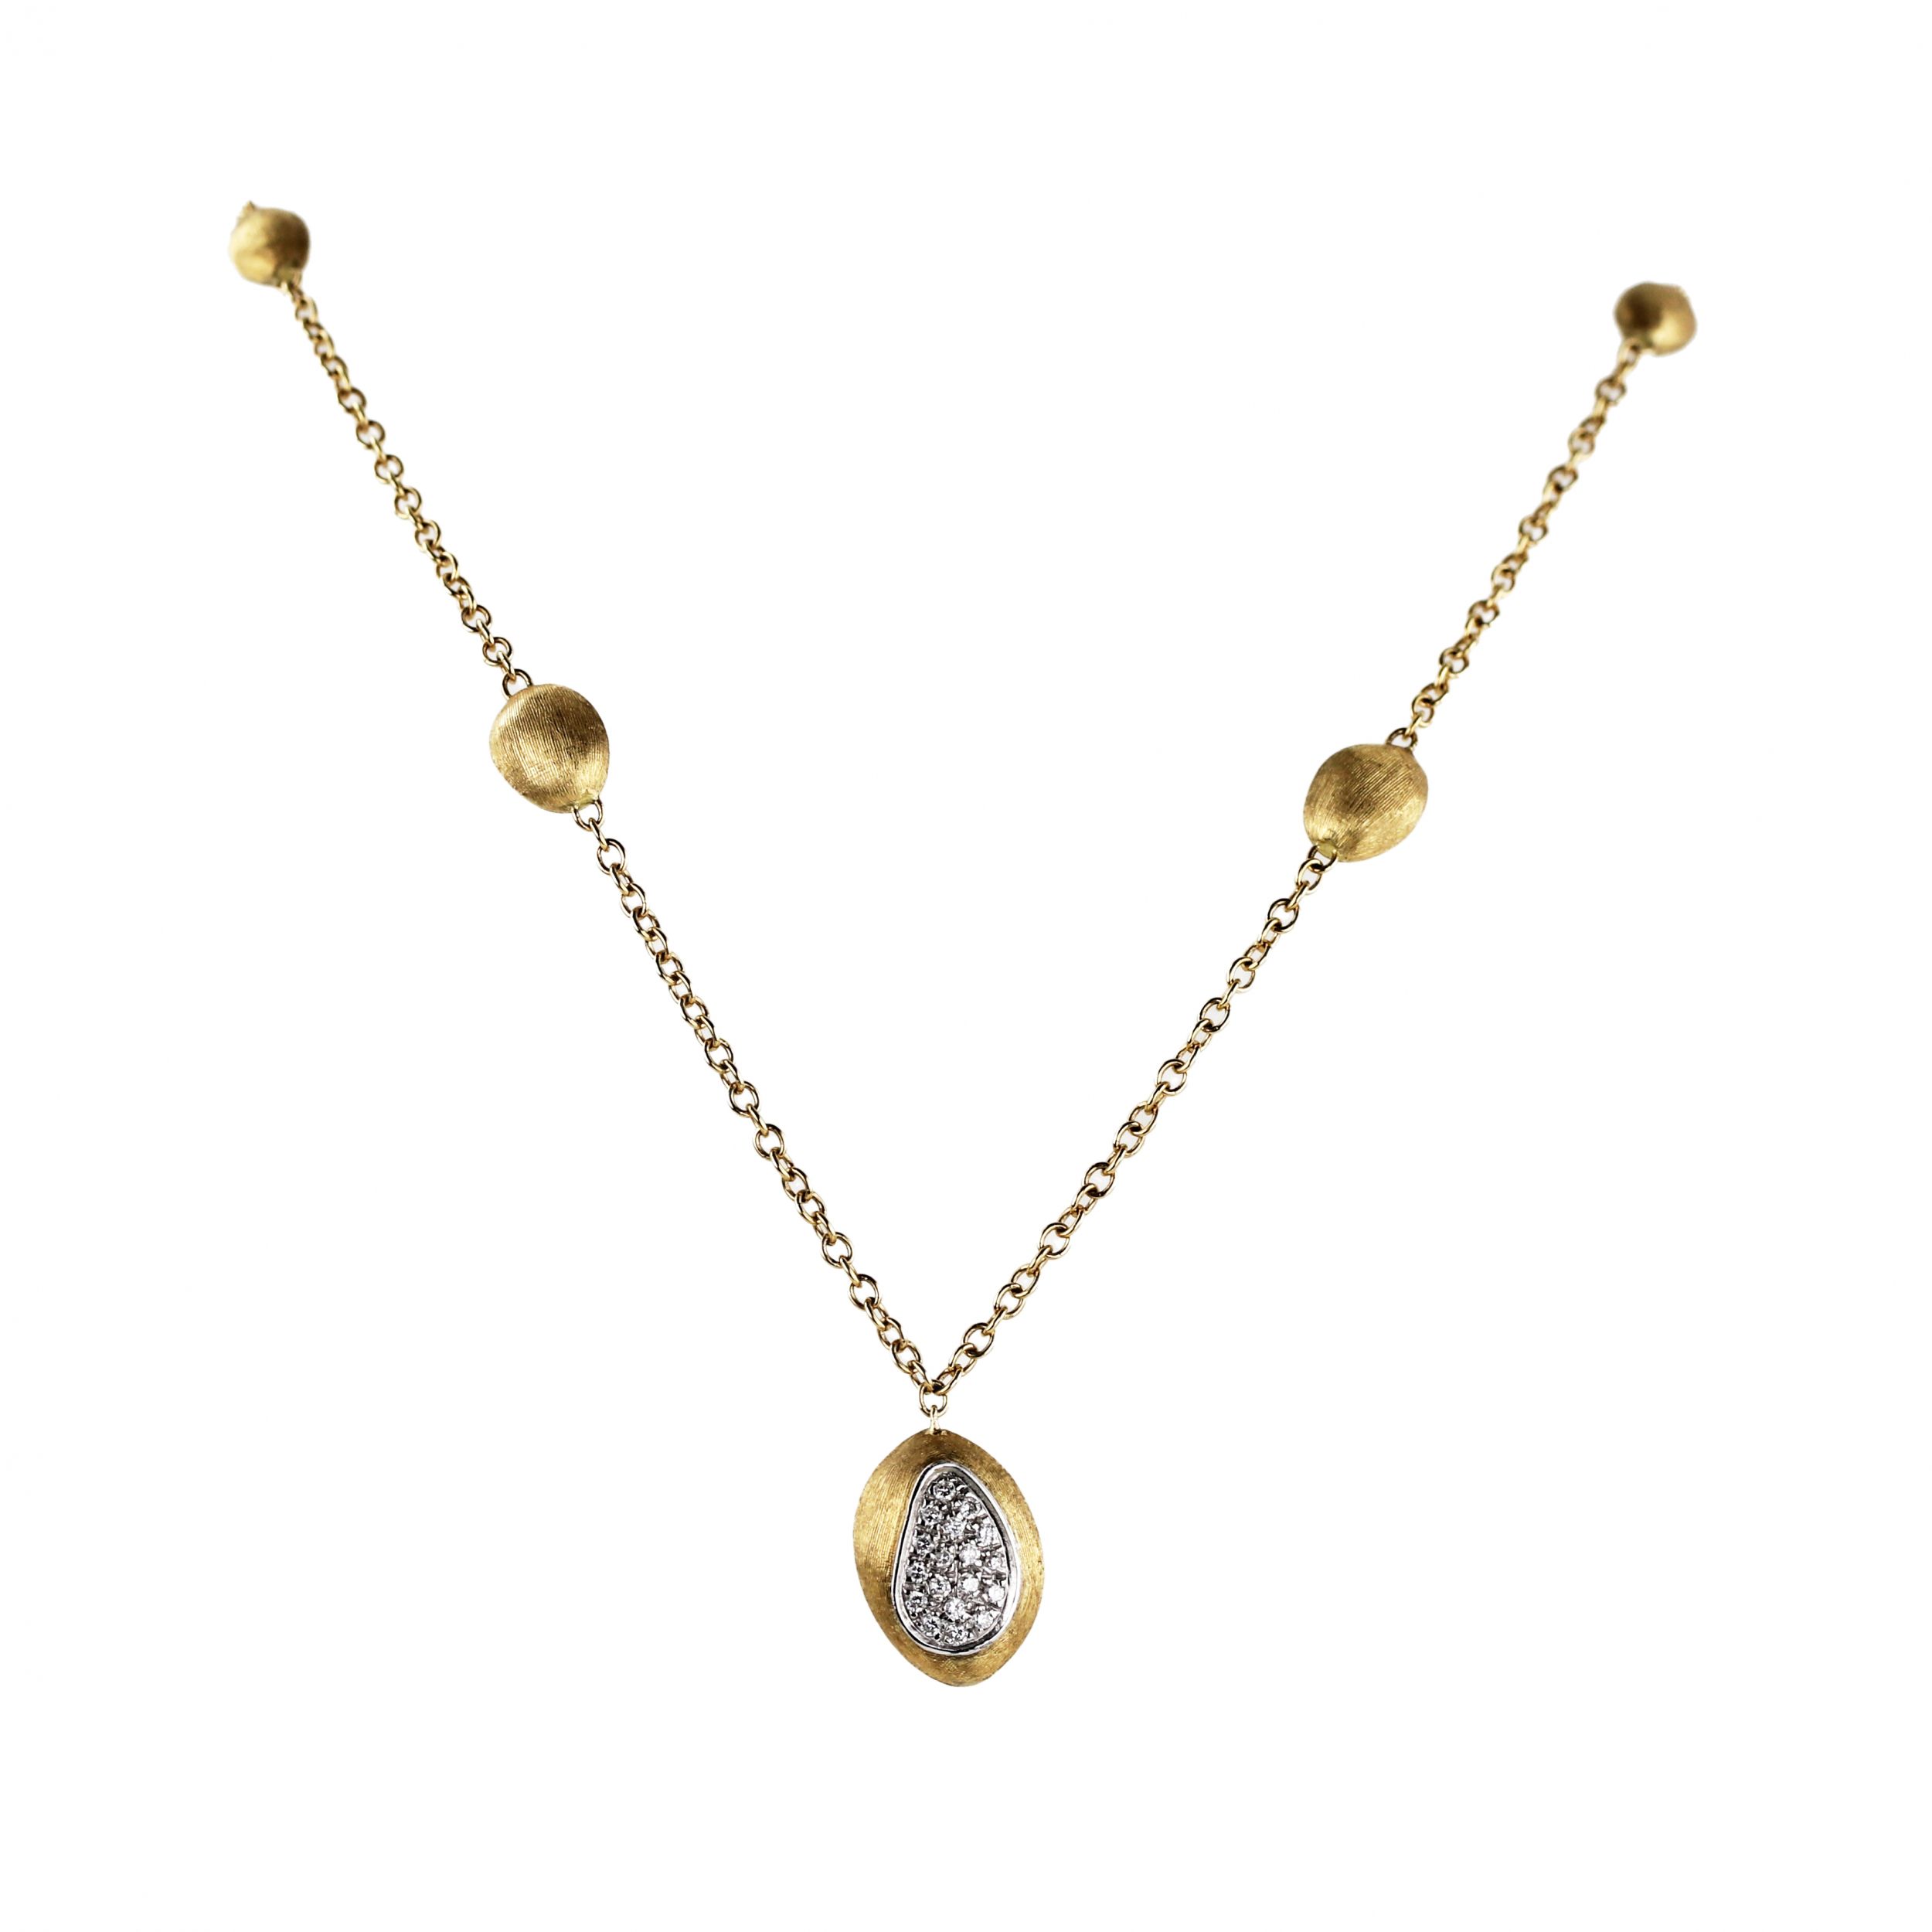 Marco-Bisego-Original-gold-chain-with-pendant-and-diamonds-